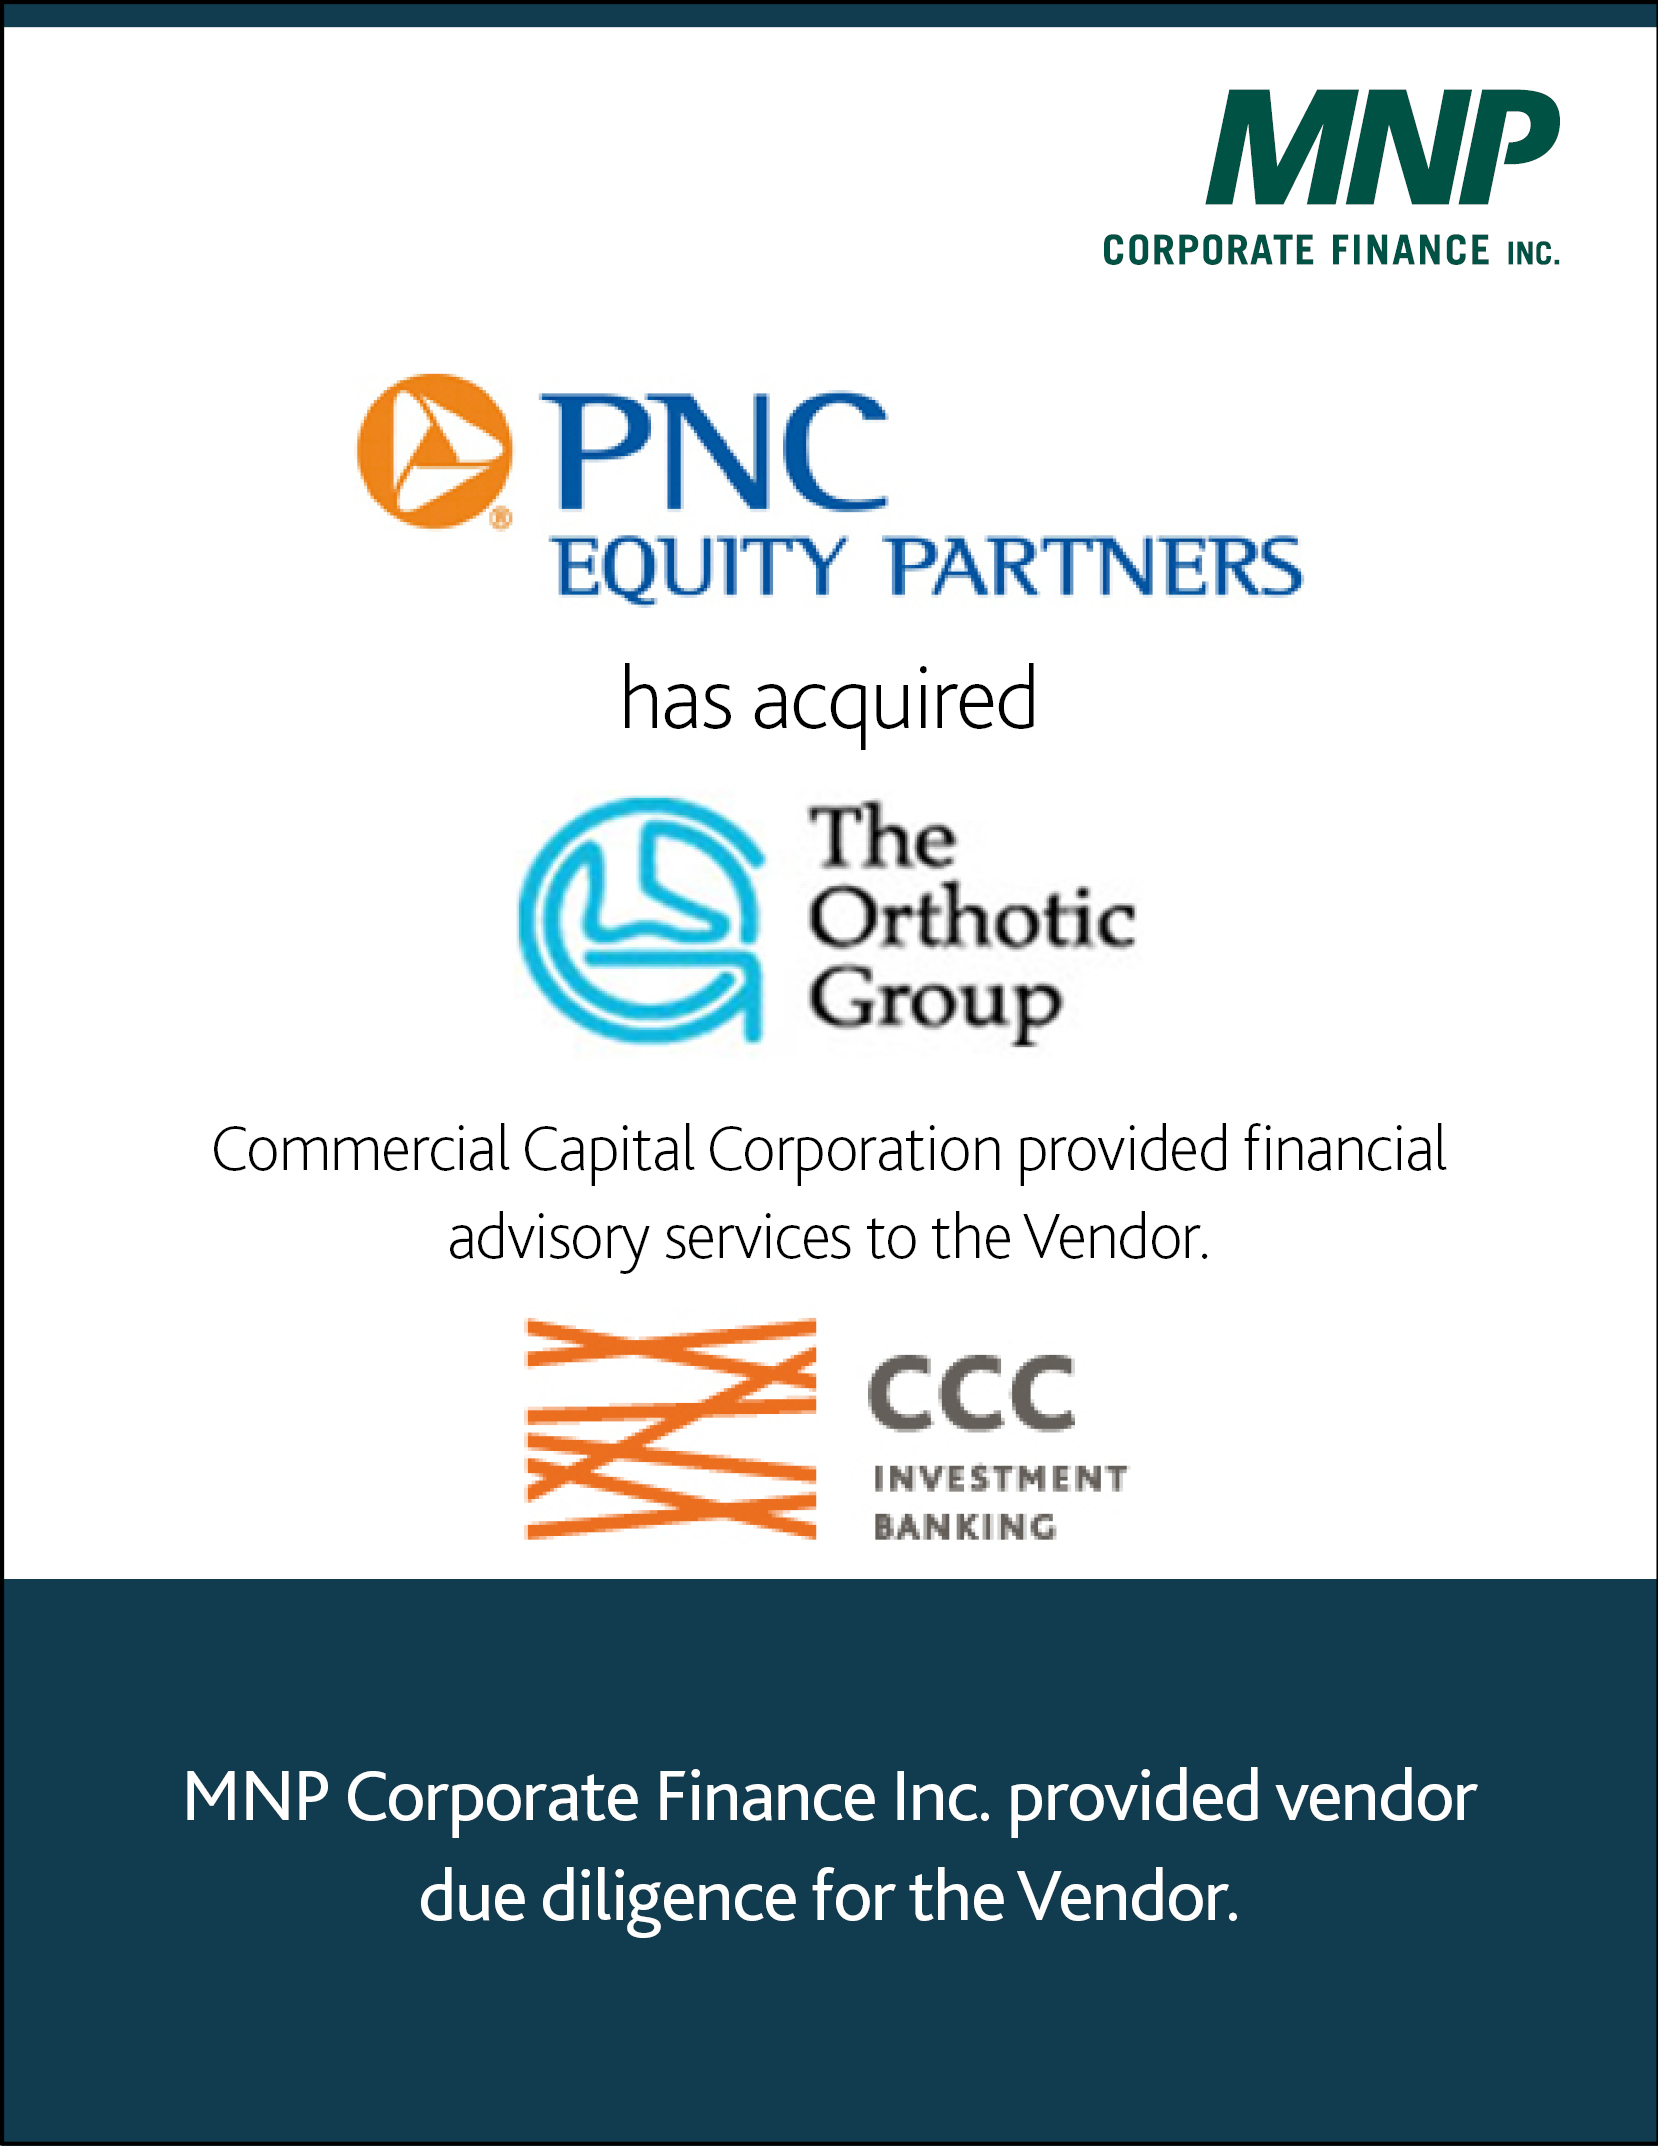 PNC Equity Partners has acquired The Orthotic Group Commercial Capital Corporation provided financial advisory services to the Vendor CCC Investment Banking